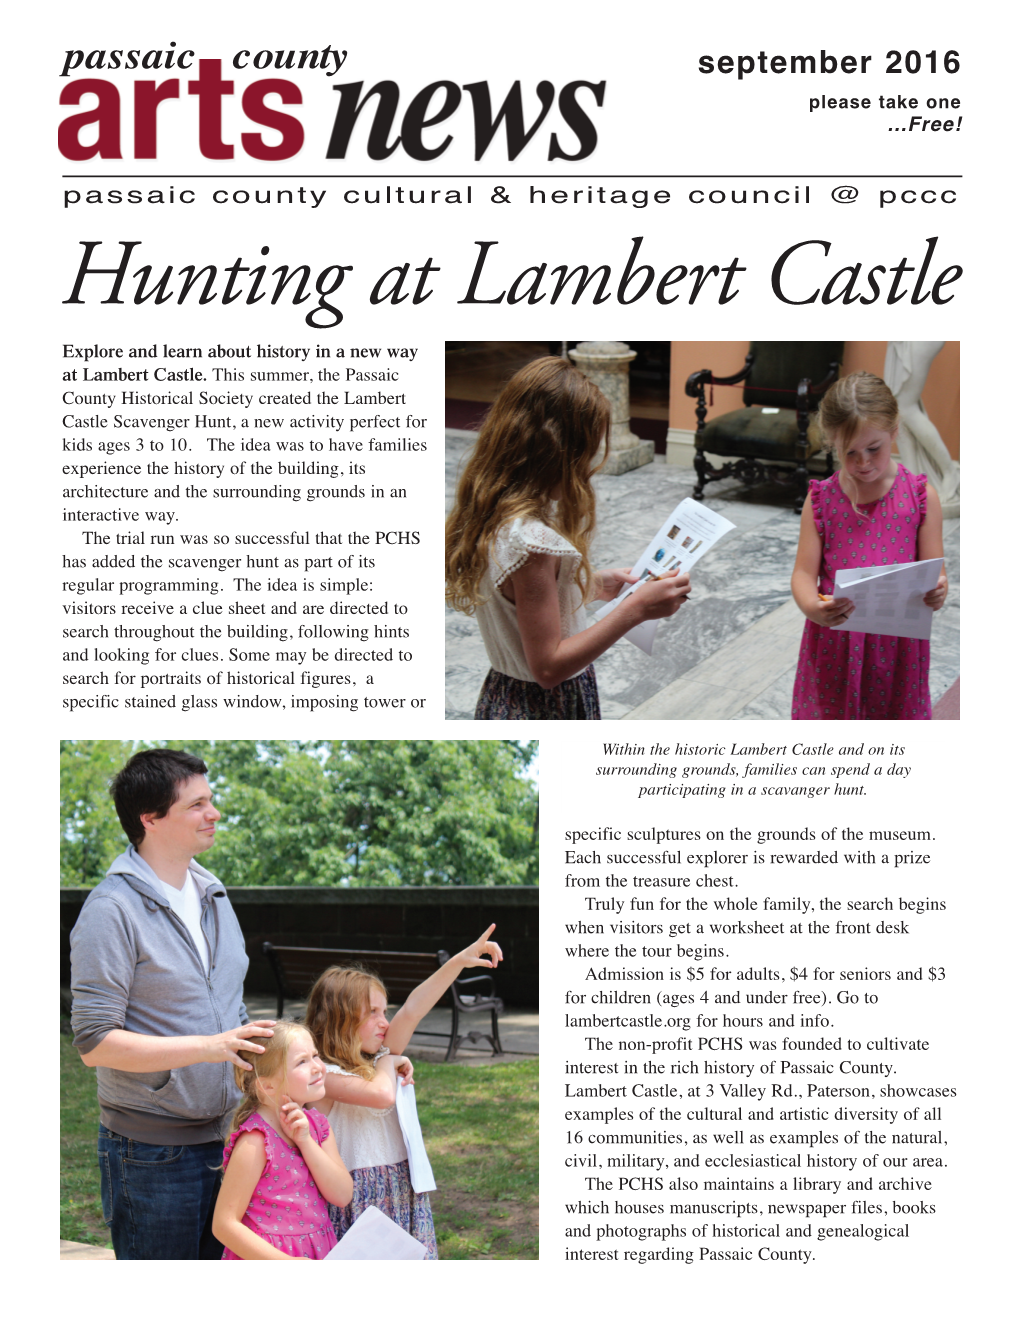 Hunting at Lambert Castle Explore and Learn About History in a New Way at Lambert Castle